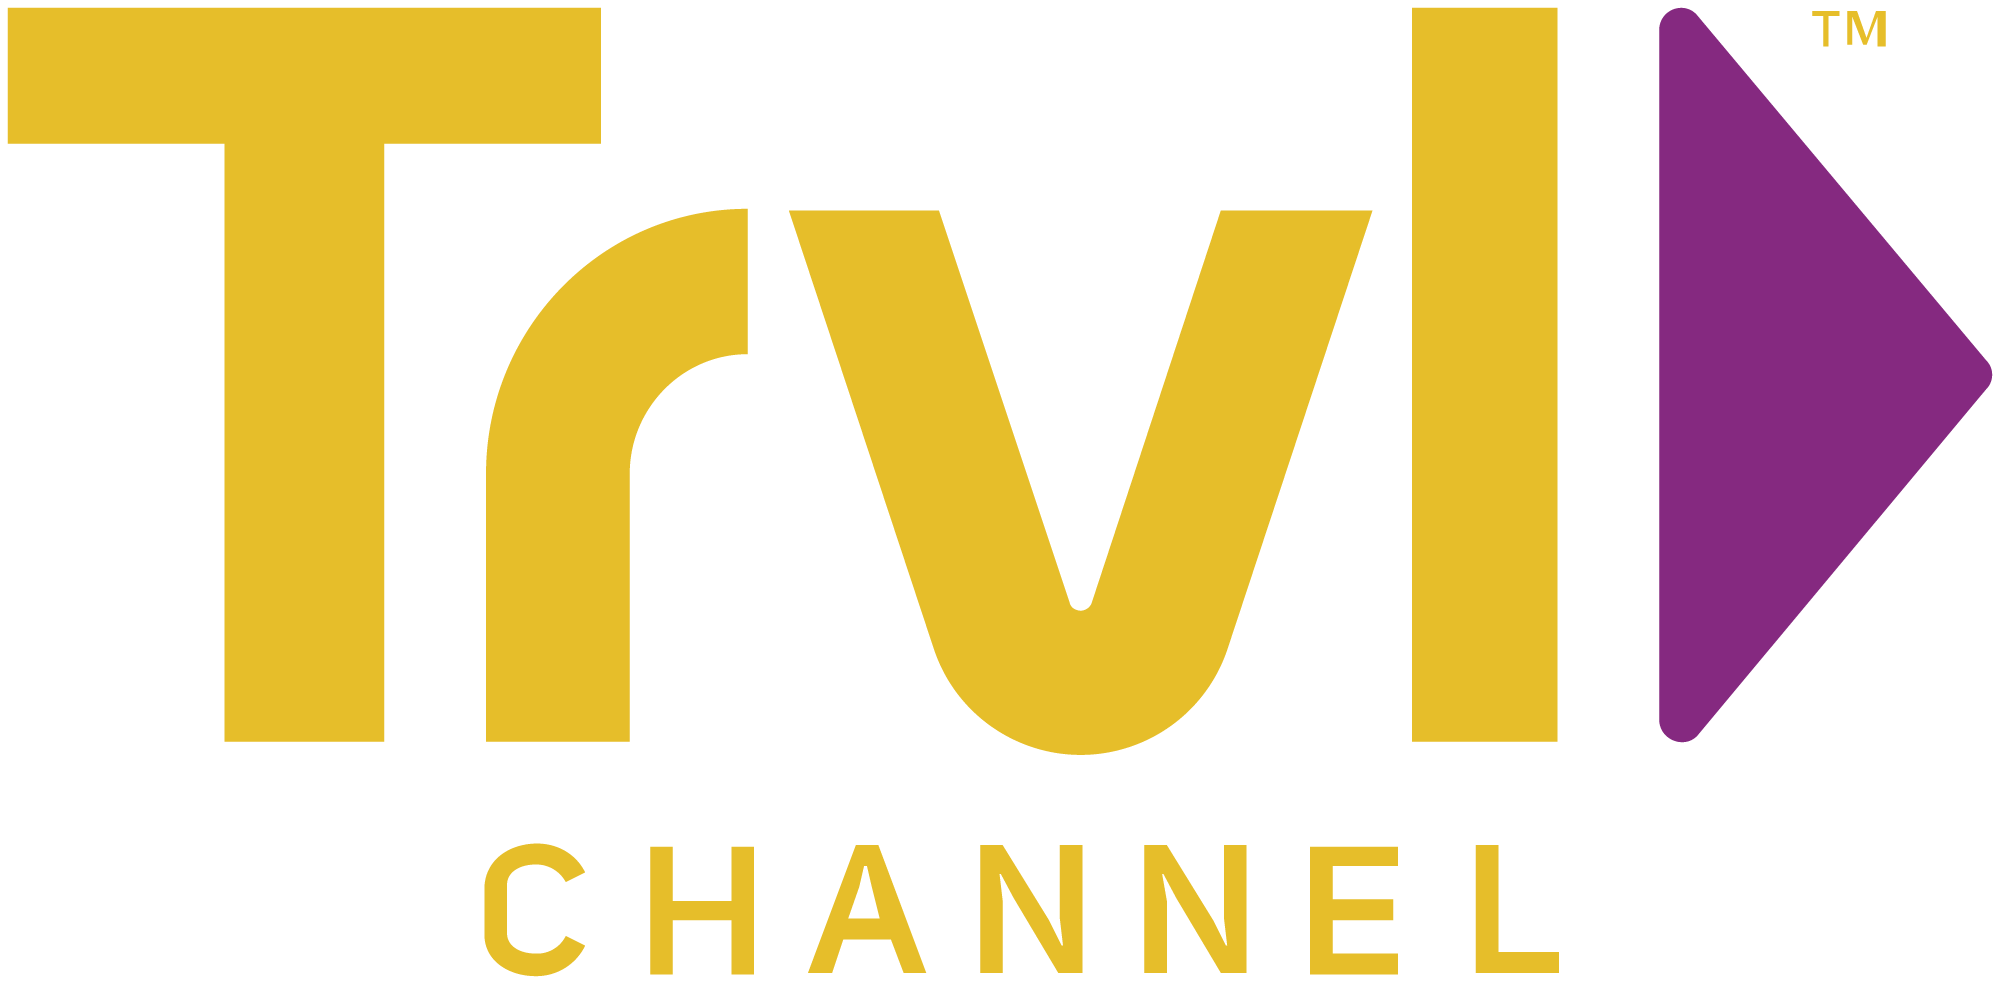 Channel Logo - Brand New: New Logo for Travel Channel